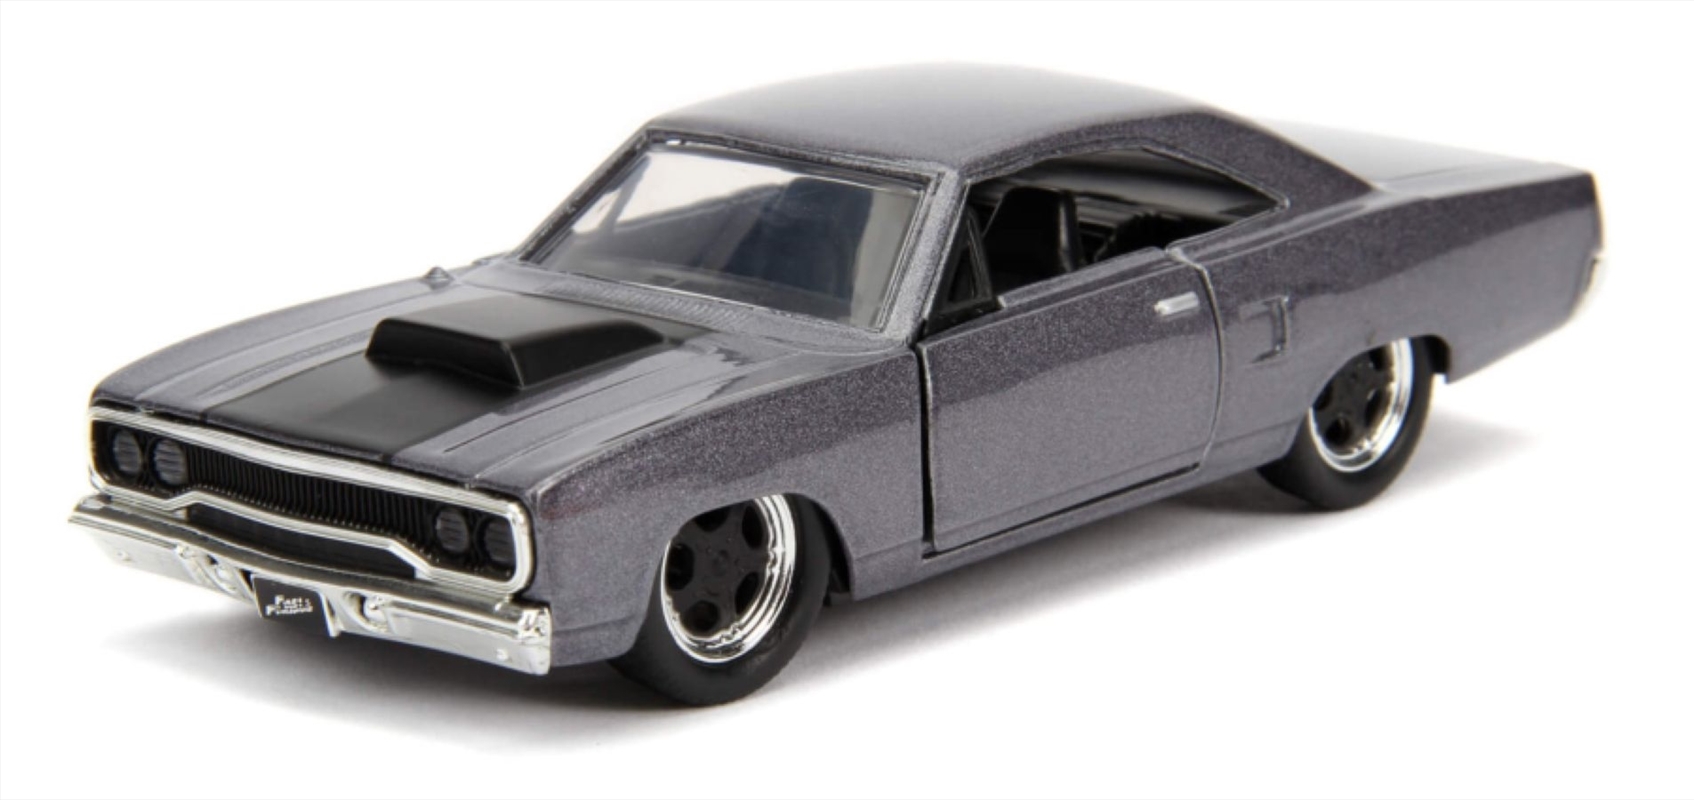 Fast and Furious - 1970 Plymouth Road Runner 1:32 Scale Hollywood Ride | Merchandise